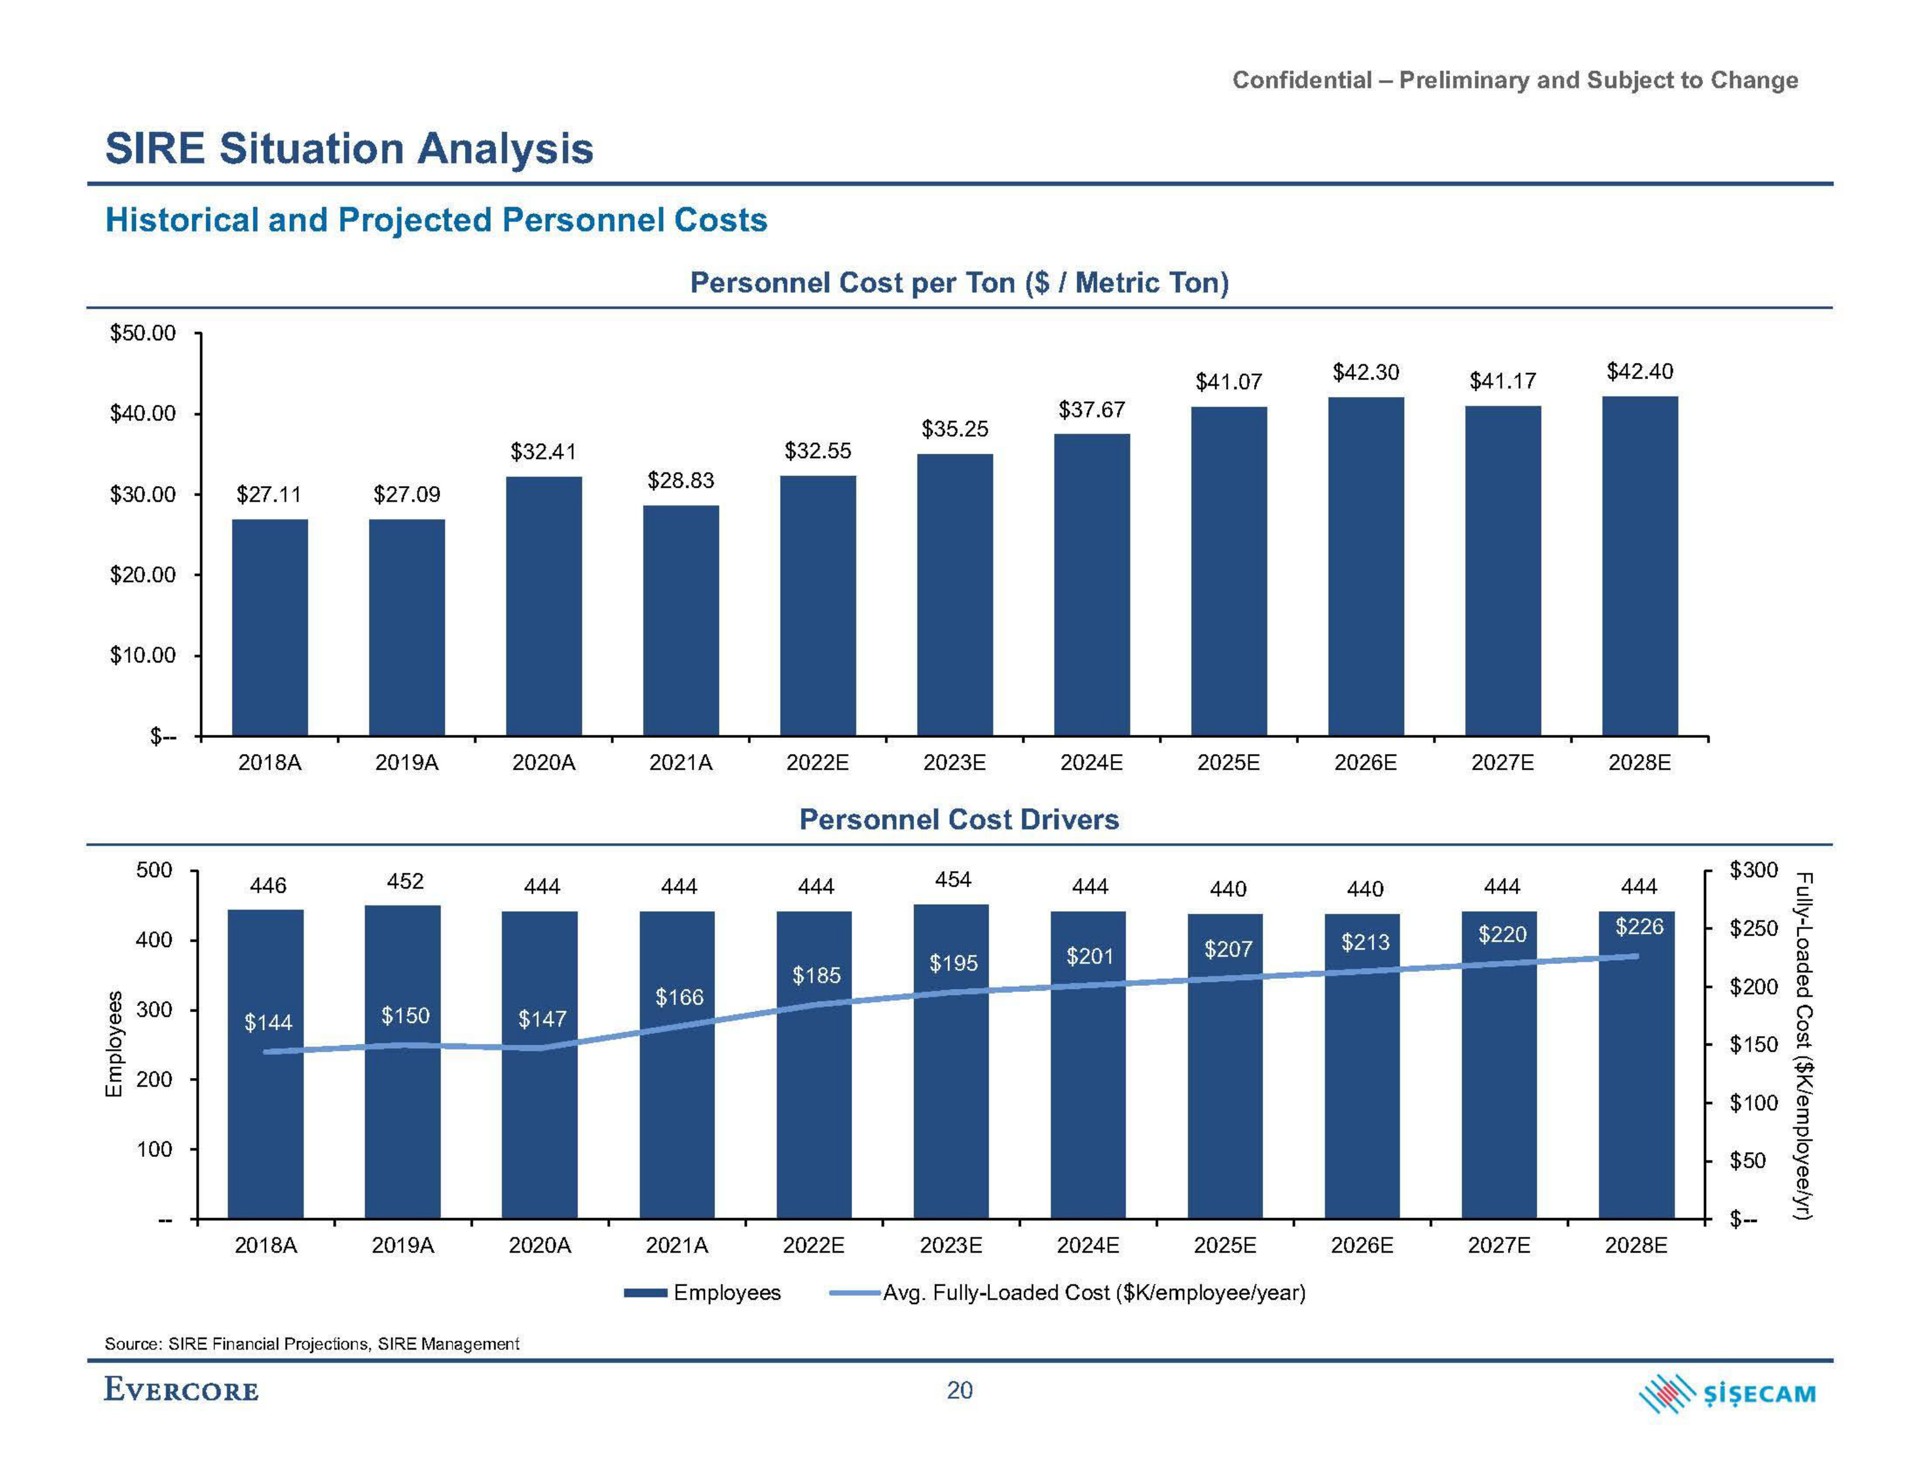 sire situation analysis historical and projected personnel costs | Evercore